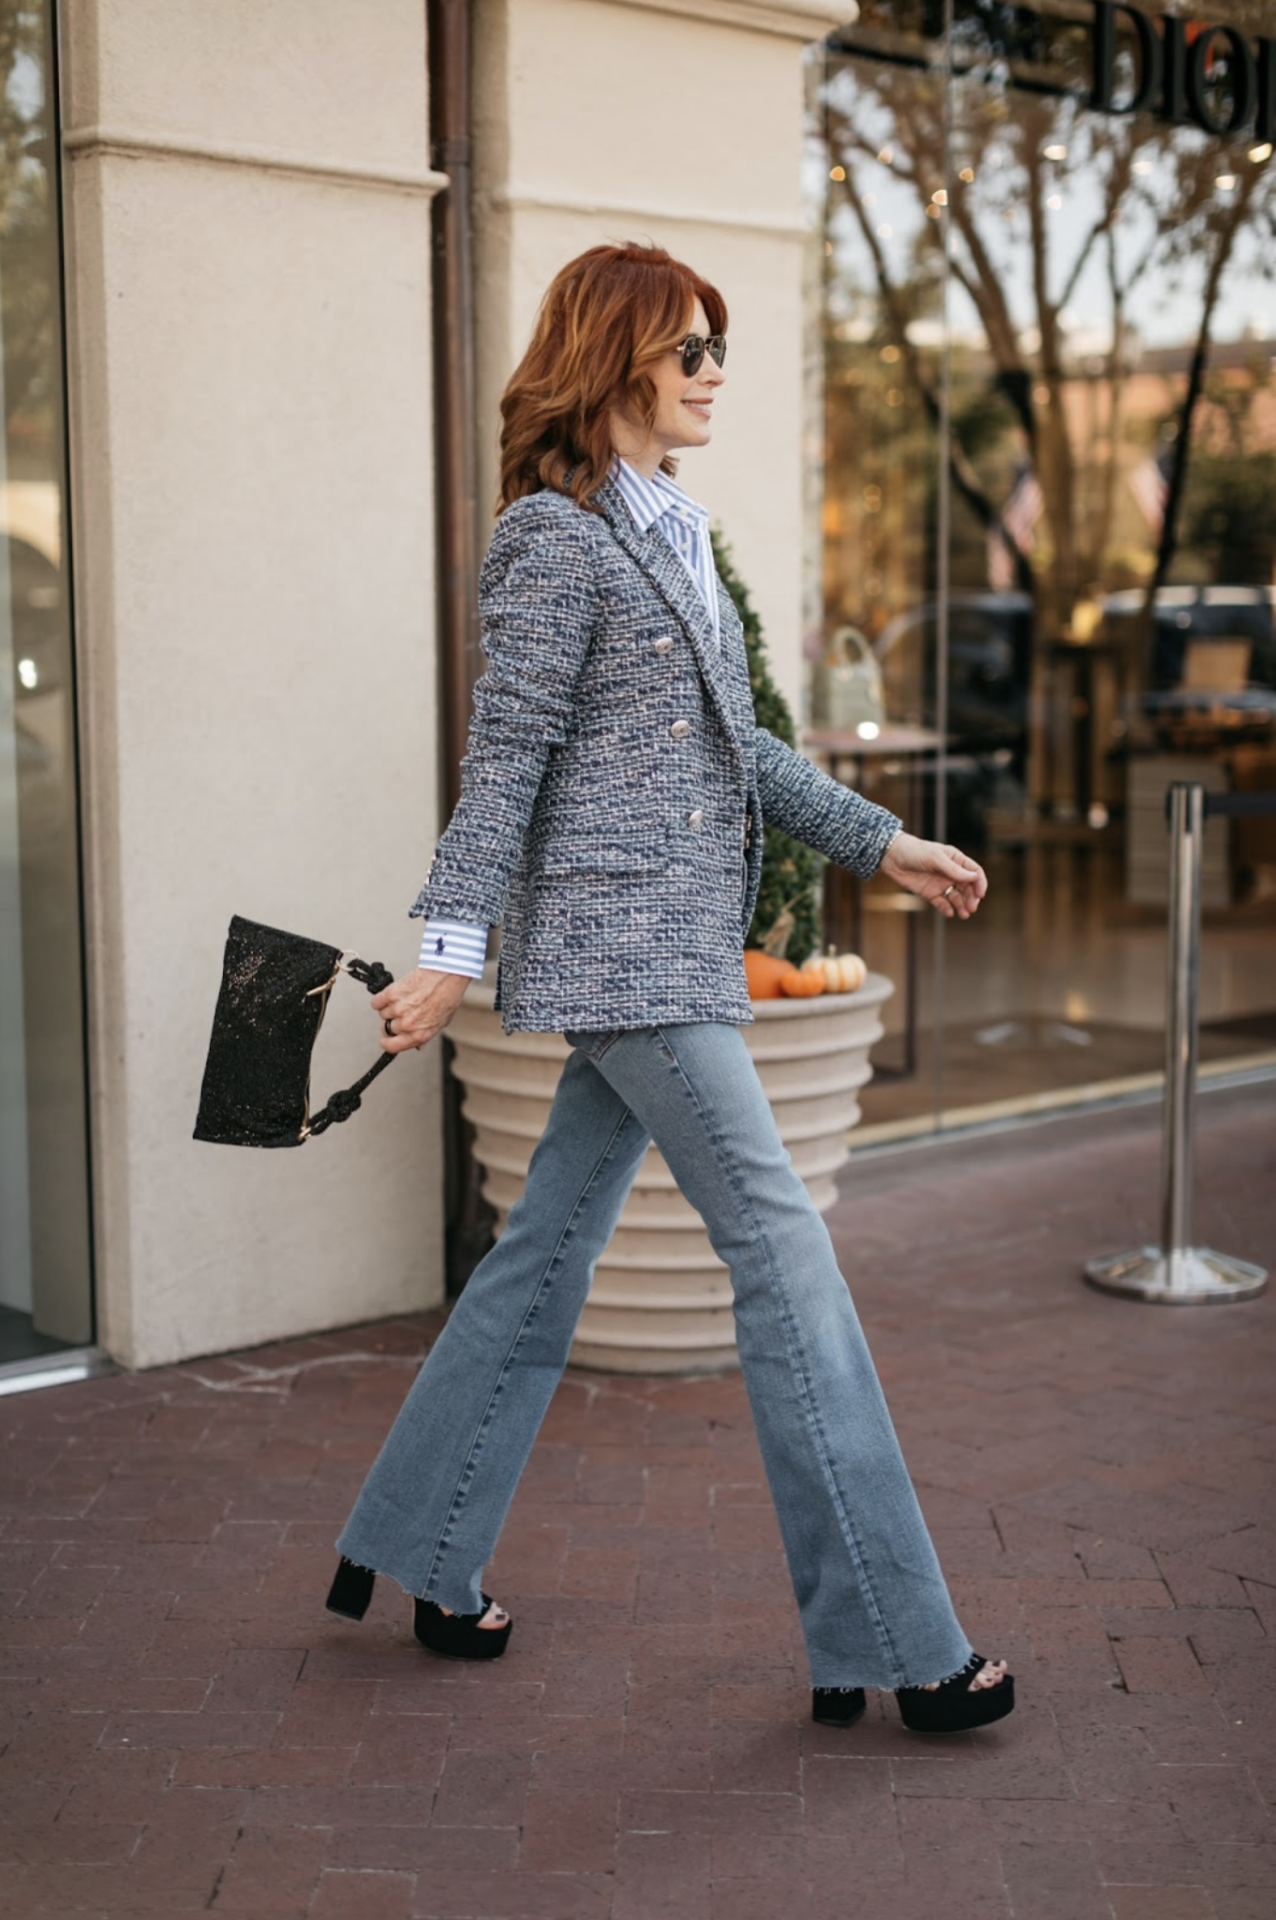 How to elevate a denim look, how to dress up jeans, what to wear with jeans over 40, how to style a blazer with jeans, how to wear a blazer with jeans, beautiful blazers, blazers for fall, blazers for winter, Cathy Williamson, the middle page blog, Erin Busbee, fashion blogger over 40, Busbee style